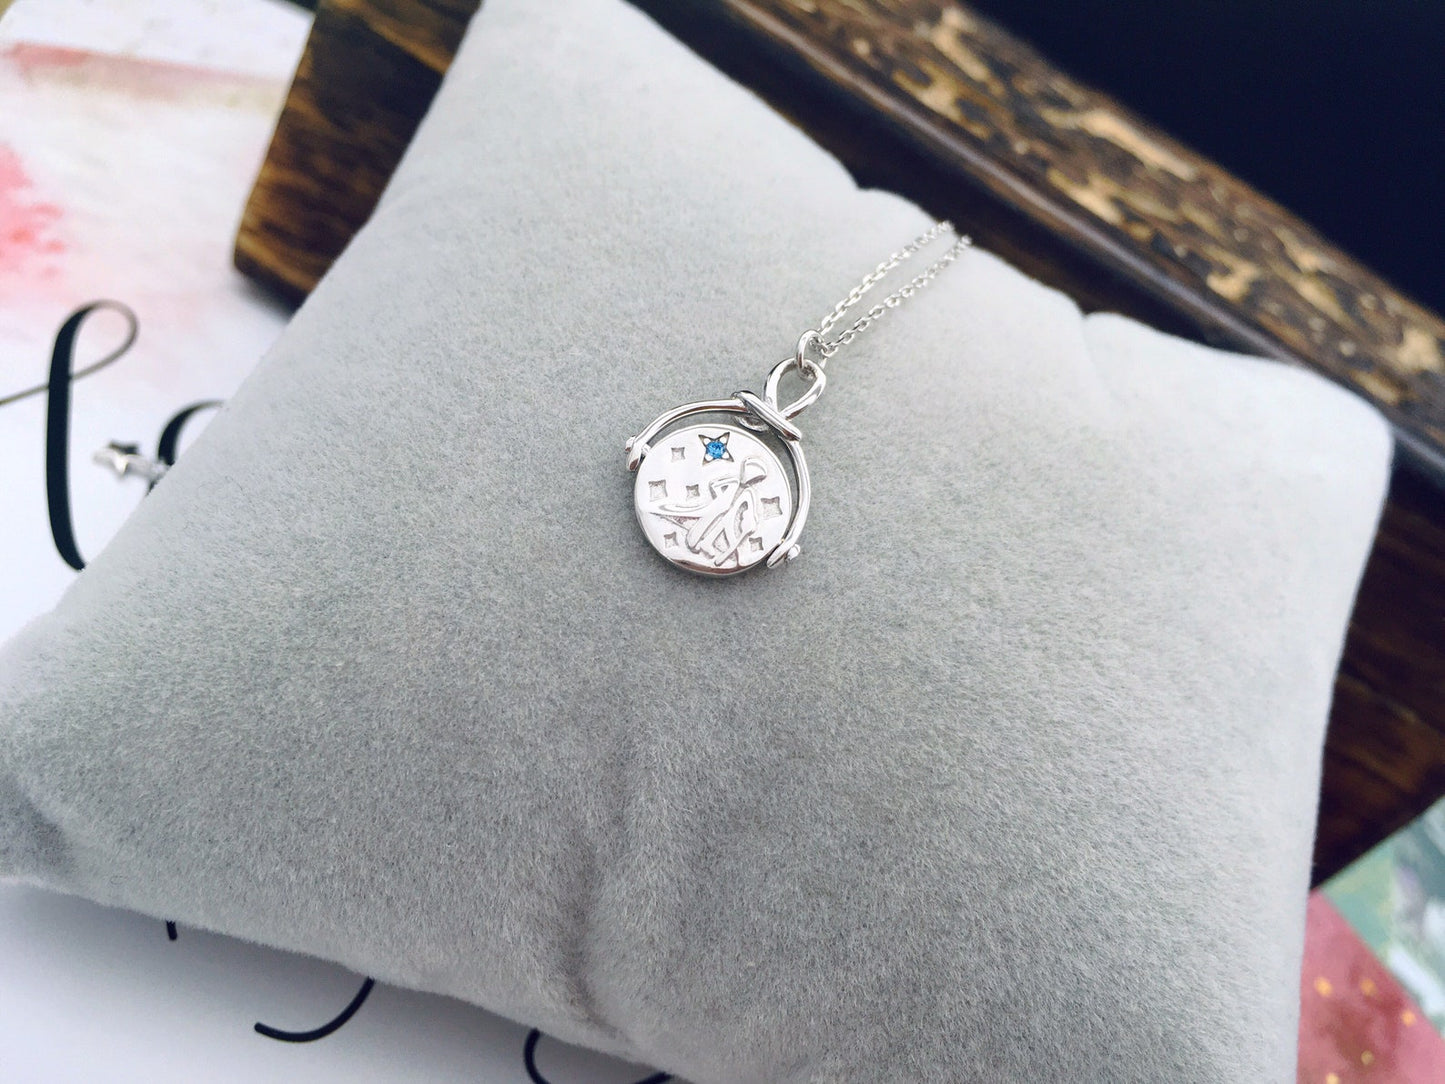 The Prince Necklace Sterling Silver 925 - Le Prince - Coin - Quote "The essential is invisible to the eye"